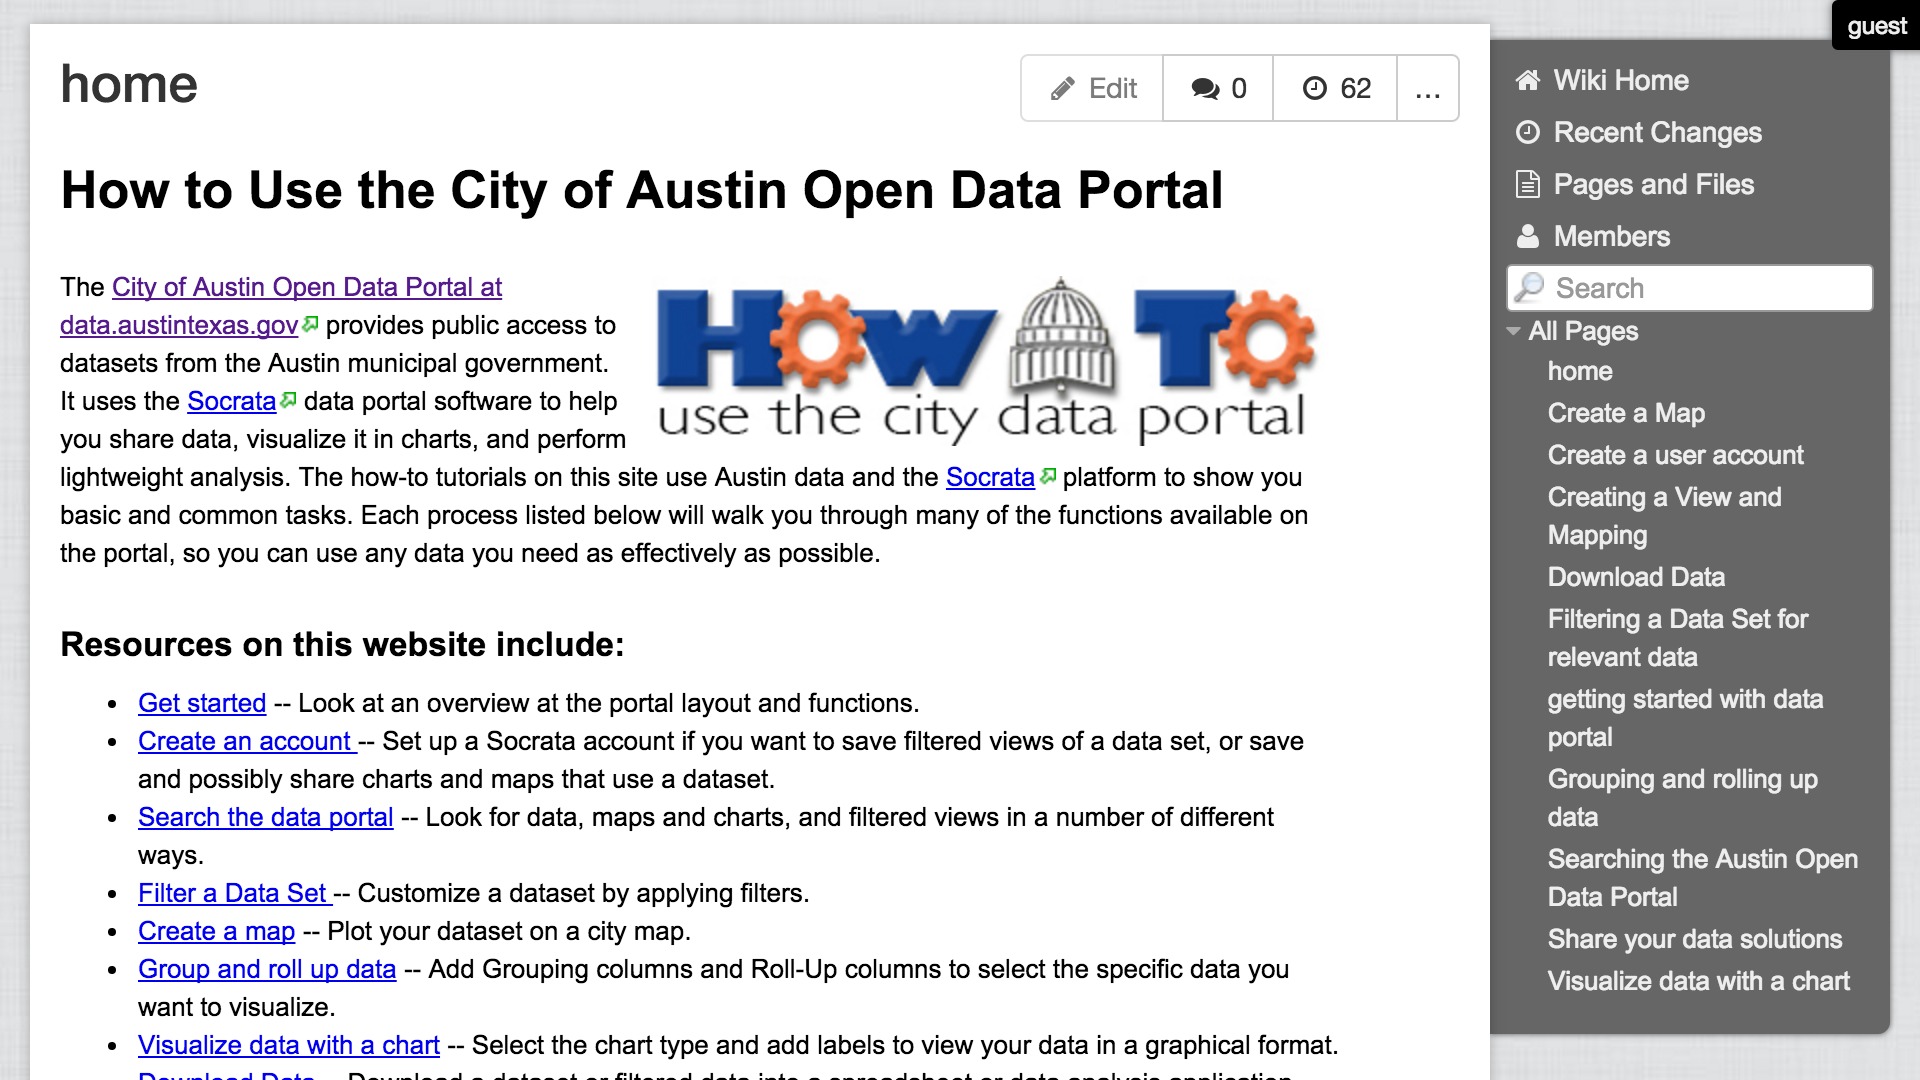 How to Use the City of Austin Open Data Portal